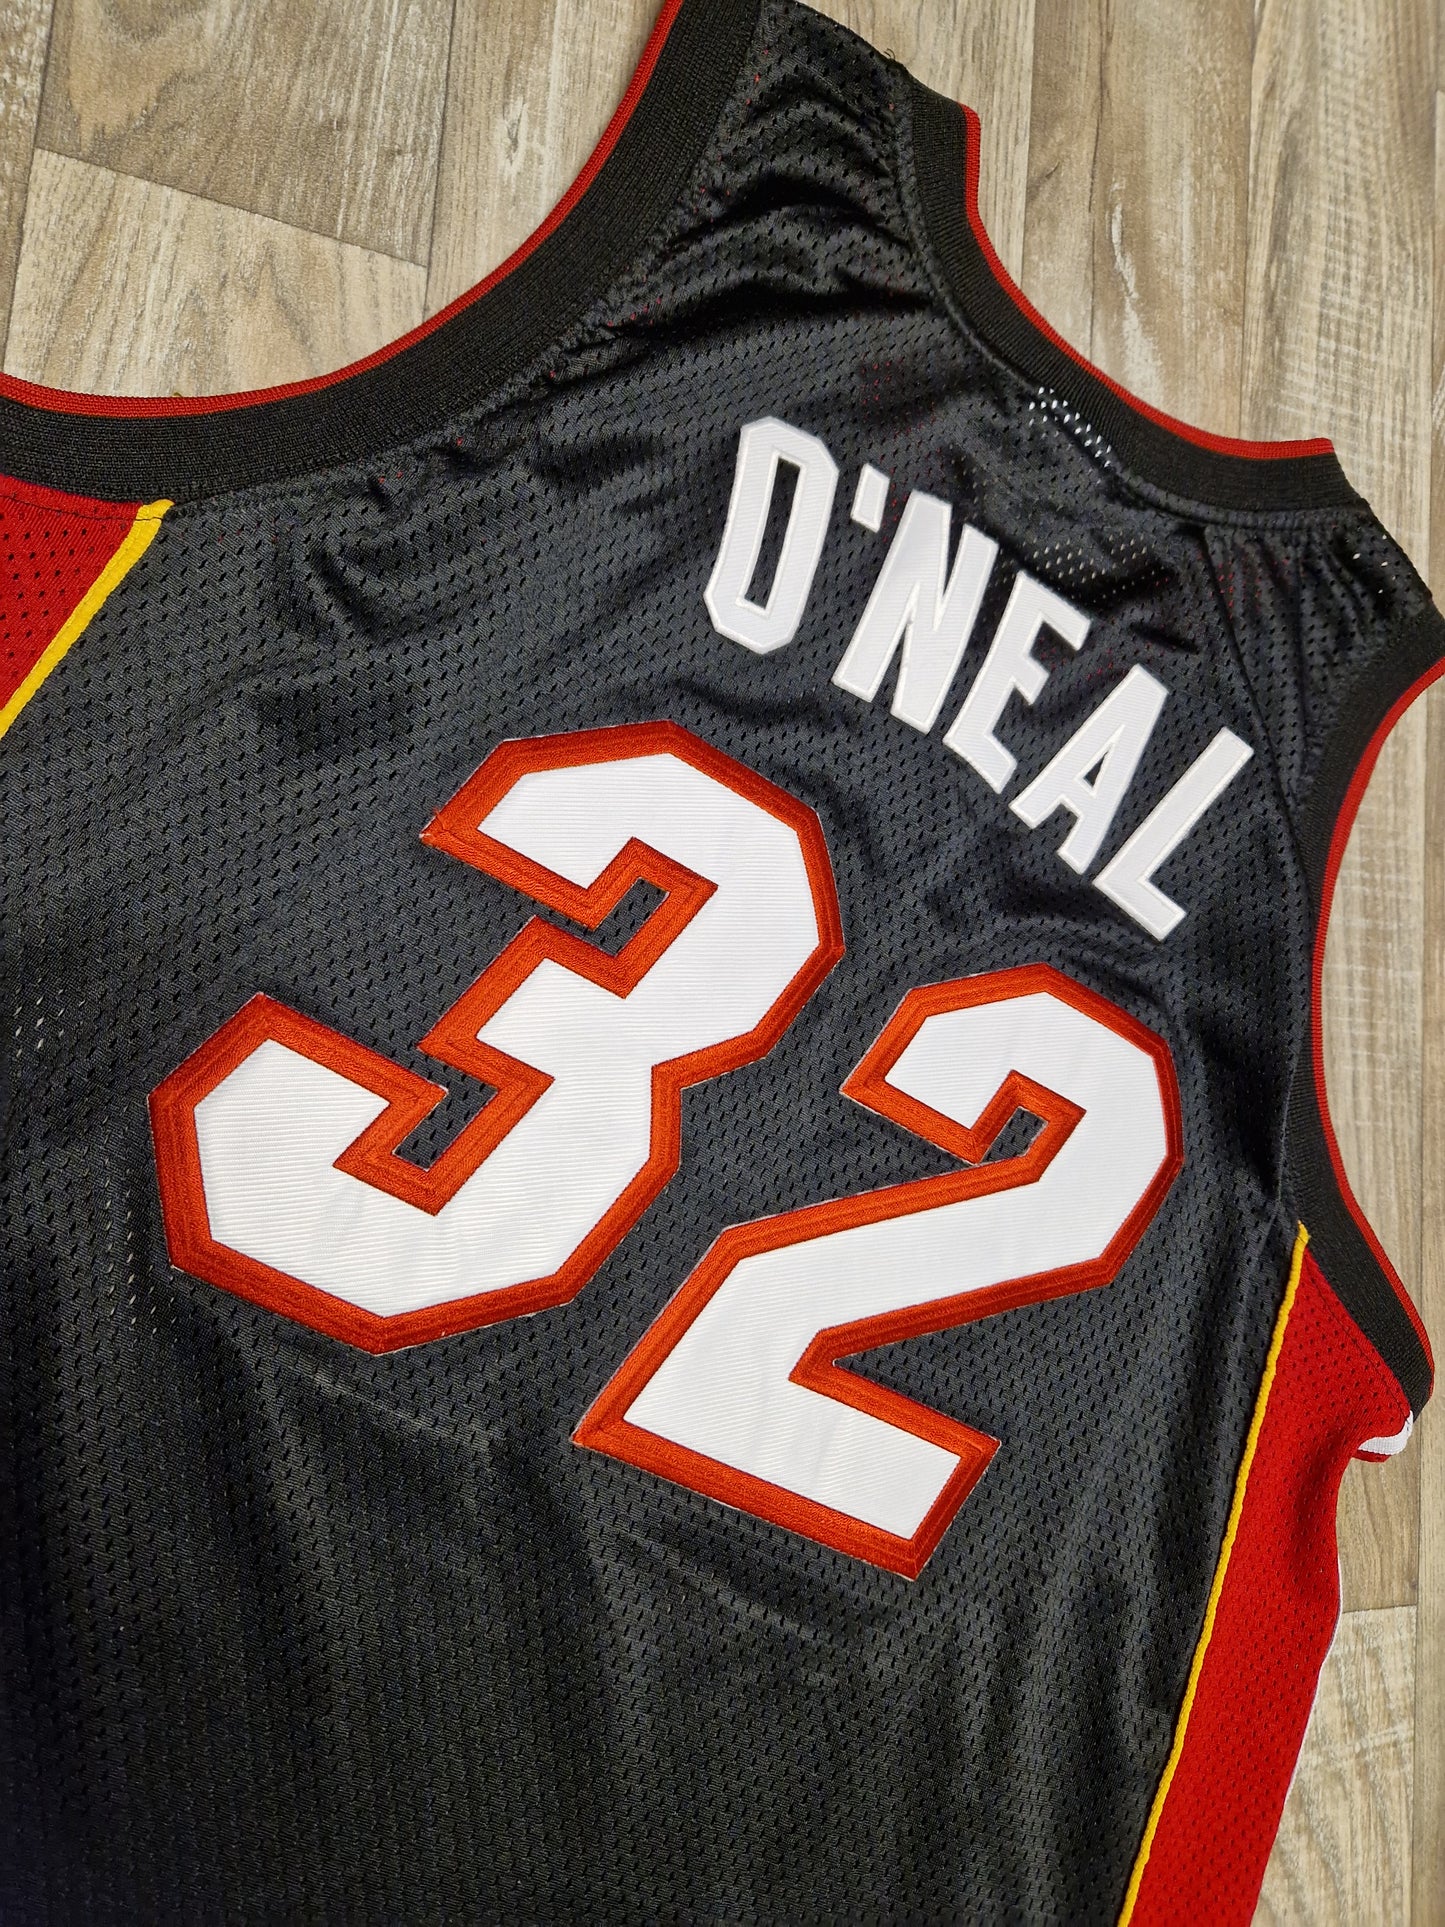 Shaquille O'Neal Miami Heat Jersey Size Large